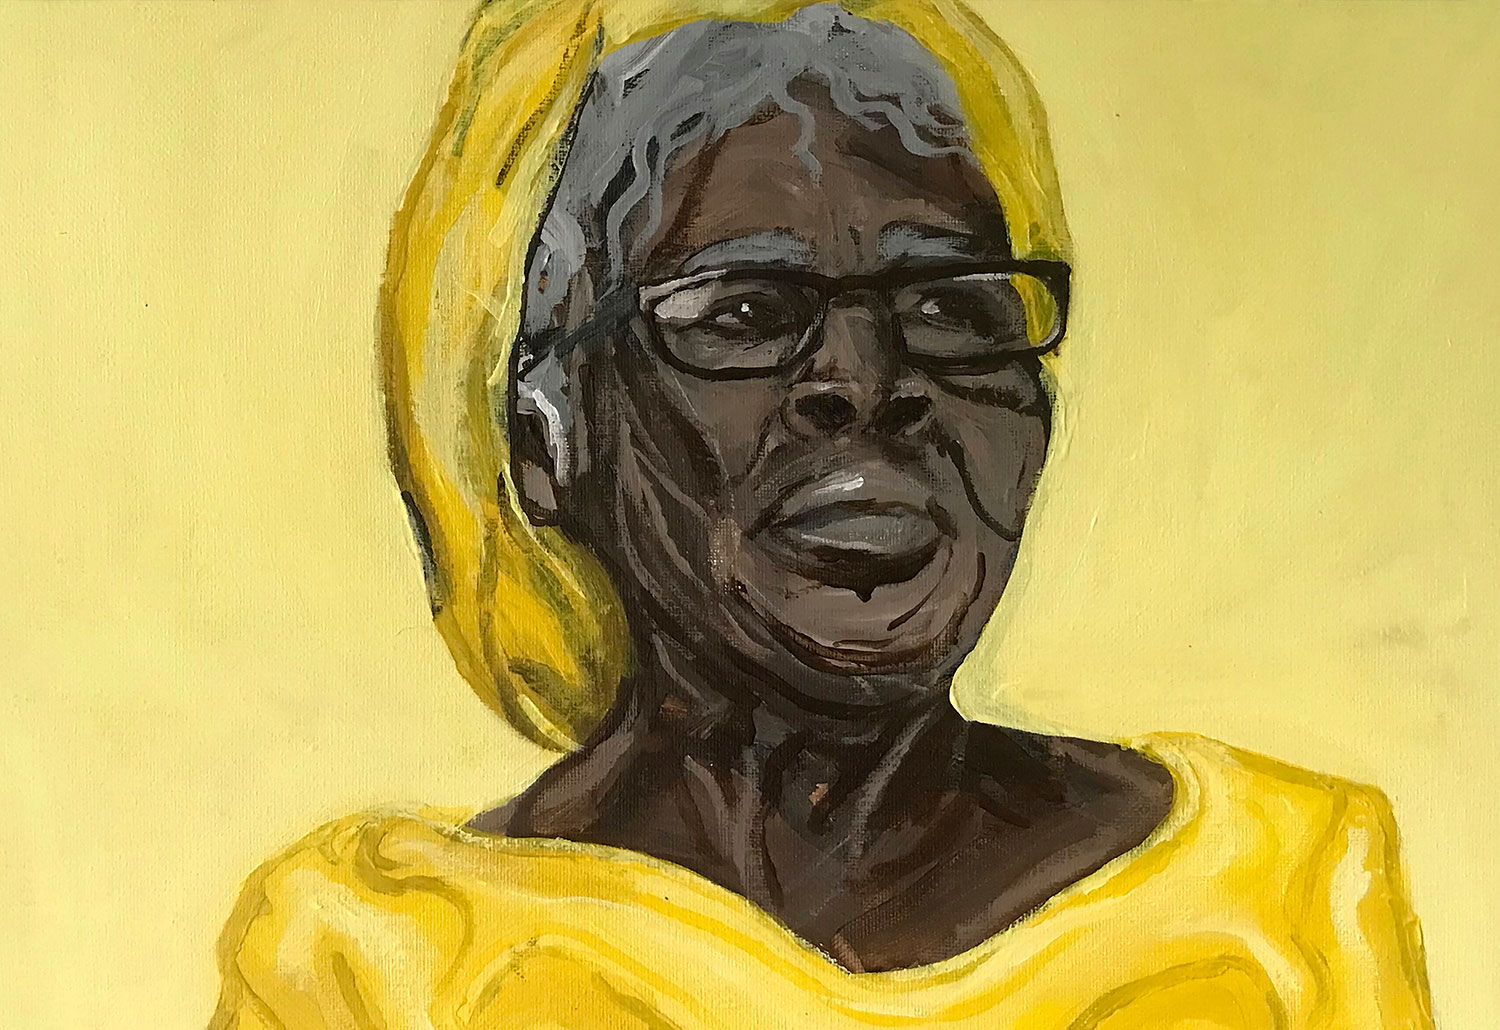 "Opal Lee" by Sabrina Kliza. Painting of an older black woman with grey hair, wearing glasses and yellow outfit against a lighter yellow background